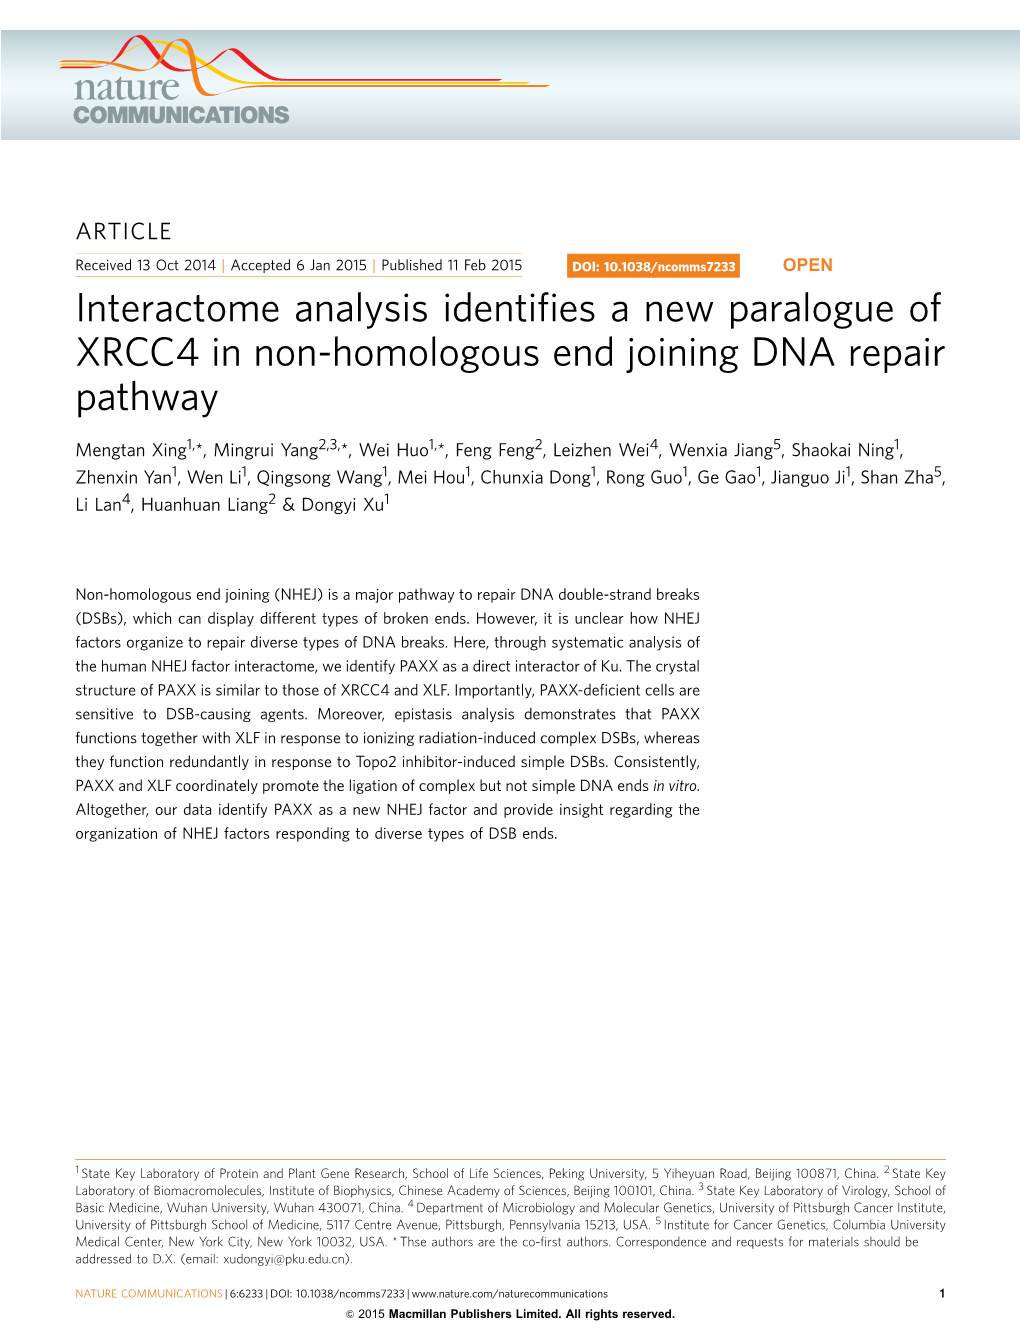 Interactome Analysis Identifies a New Paralogue of XRCC4 In